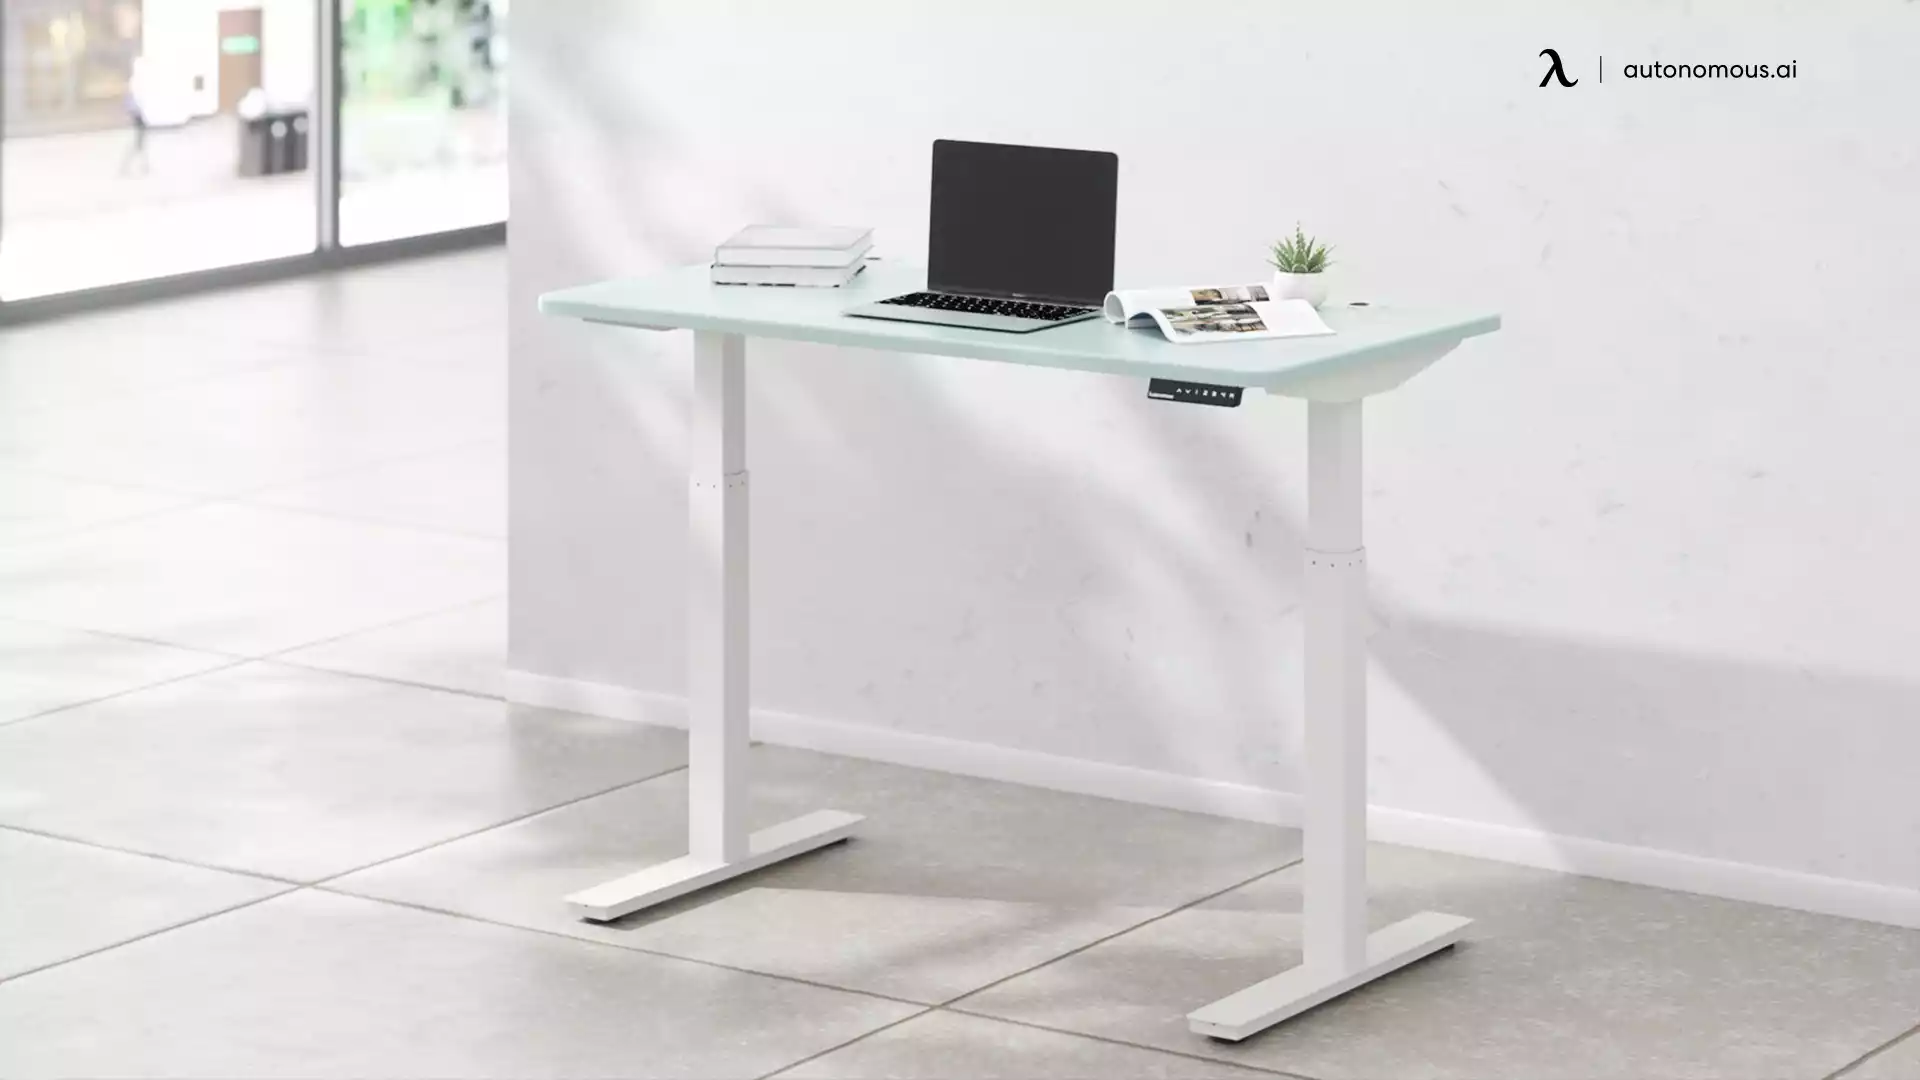 Chair and Desk Out-of-Sync – Looks Beautiful But Isn’t Functional